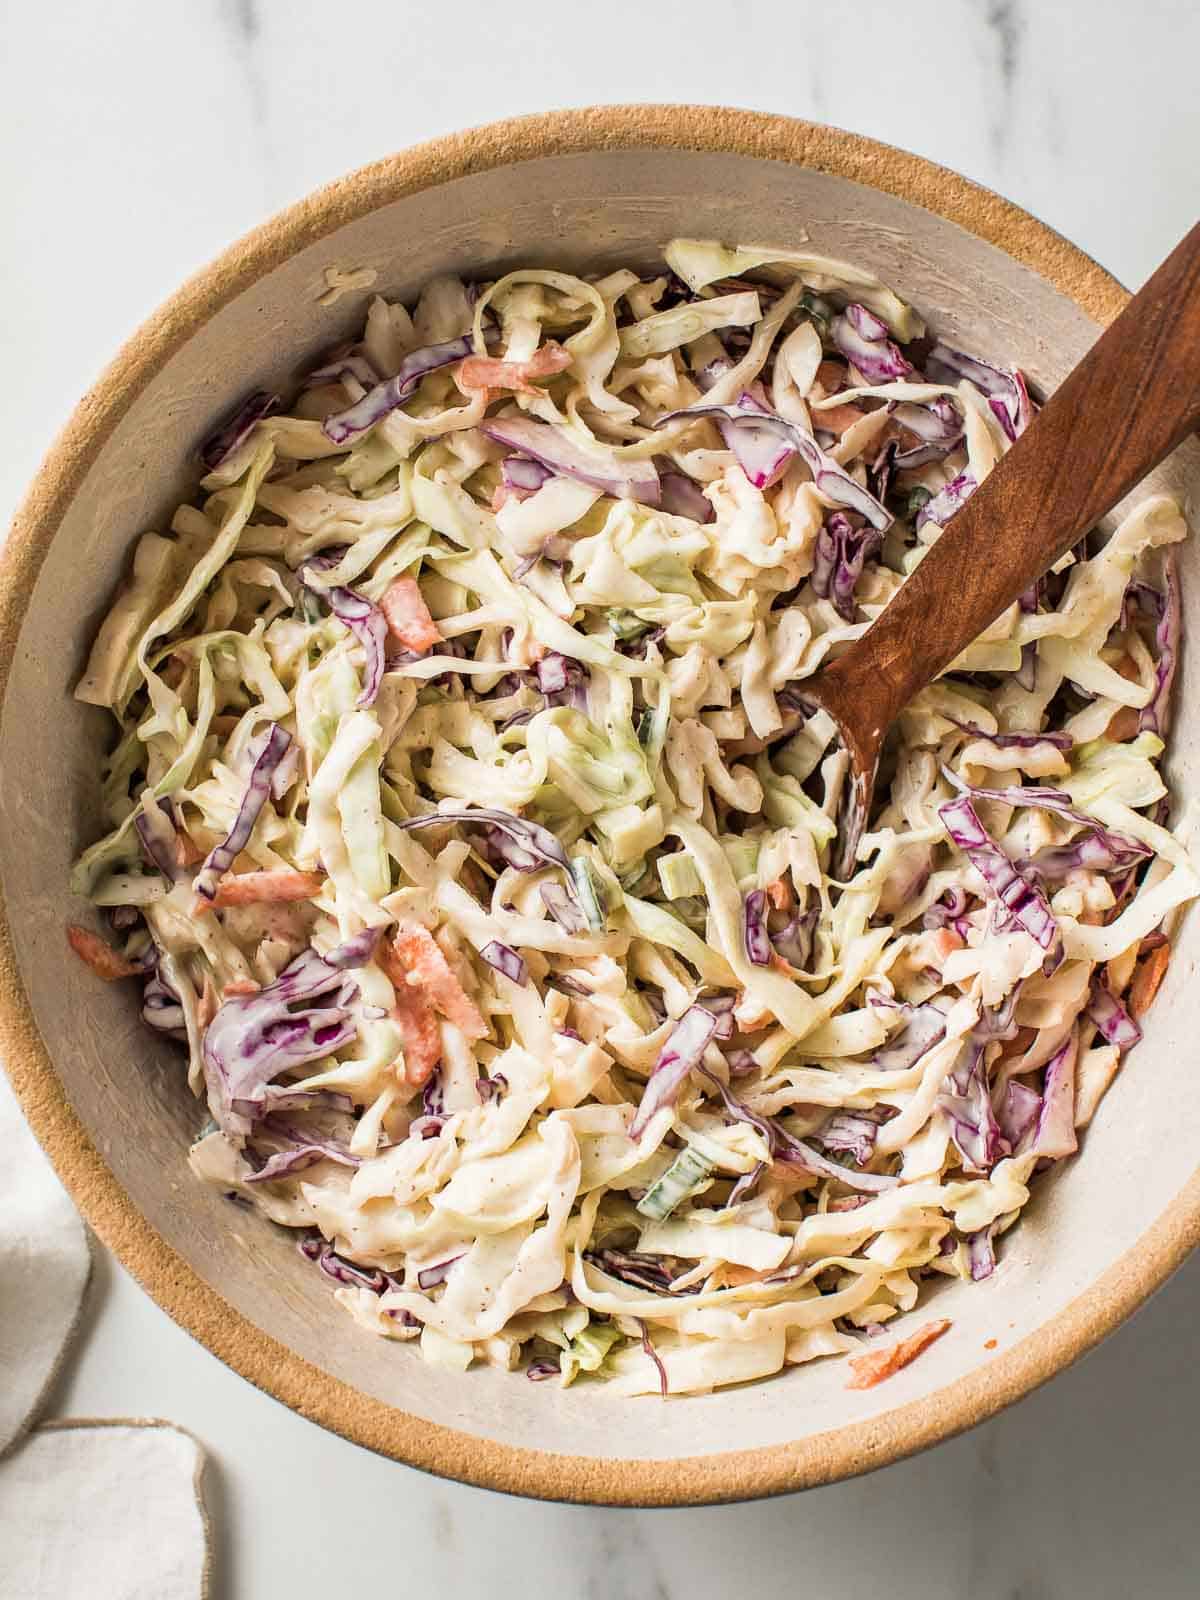 Creamy coleslaw in a bowl.